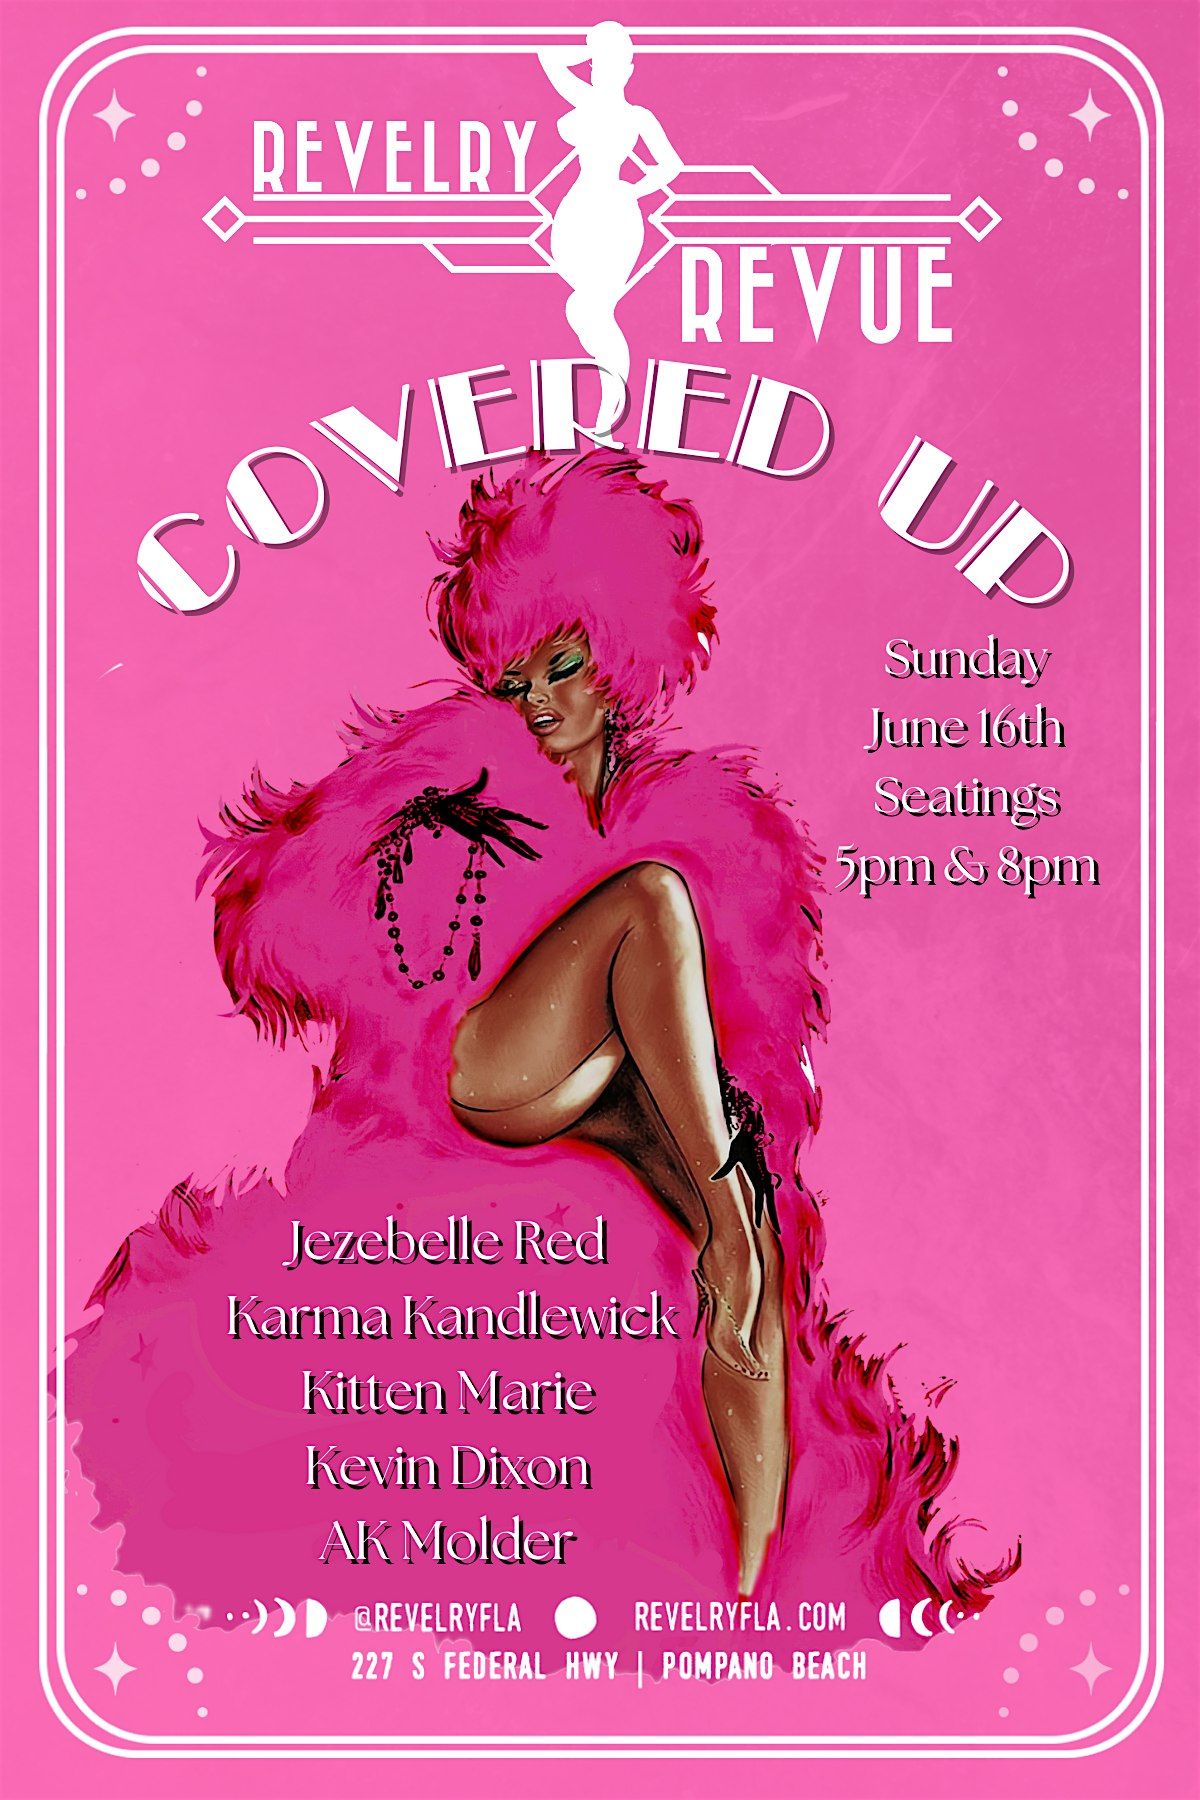 Revelry Revue - Covered Up Burlesque Show 8pm